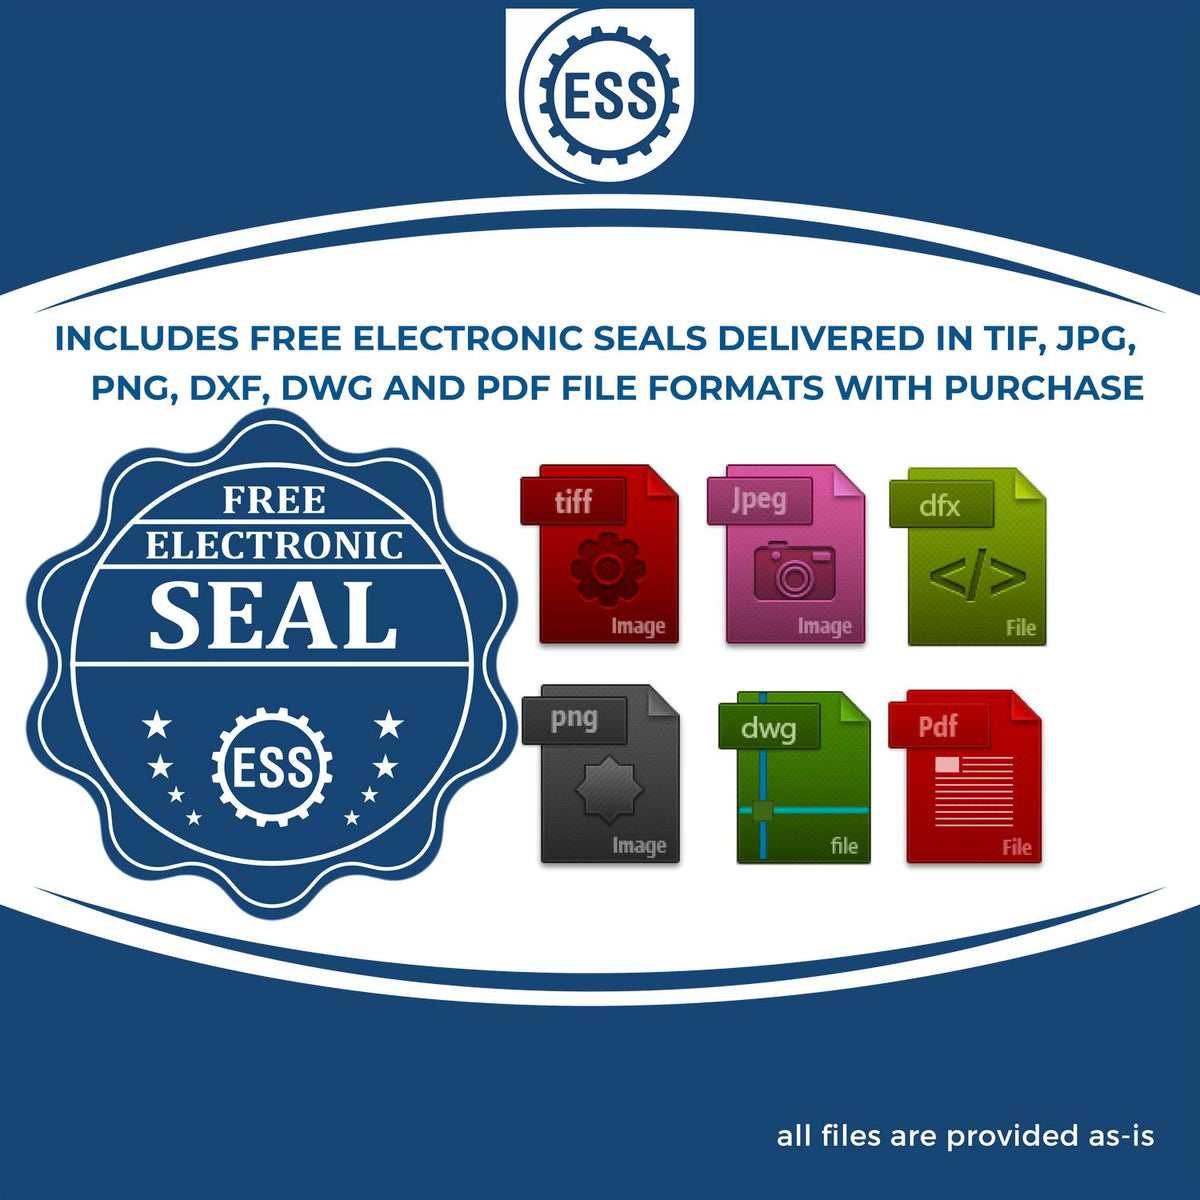 An infographic for the free electronic seal for the Arkansas Professional Engineer Seal Stamp illustrating the different file type icons such as DXF, DWG, TIF, JPG and PNG.